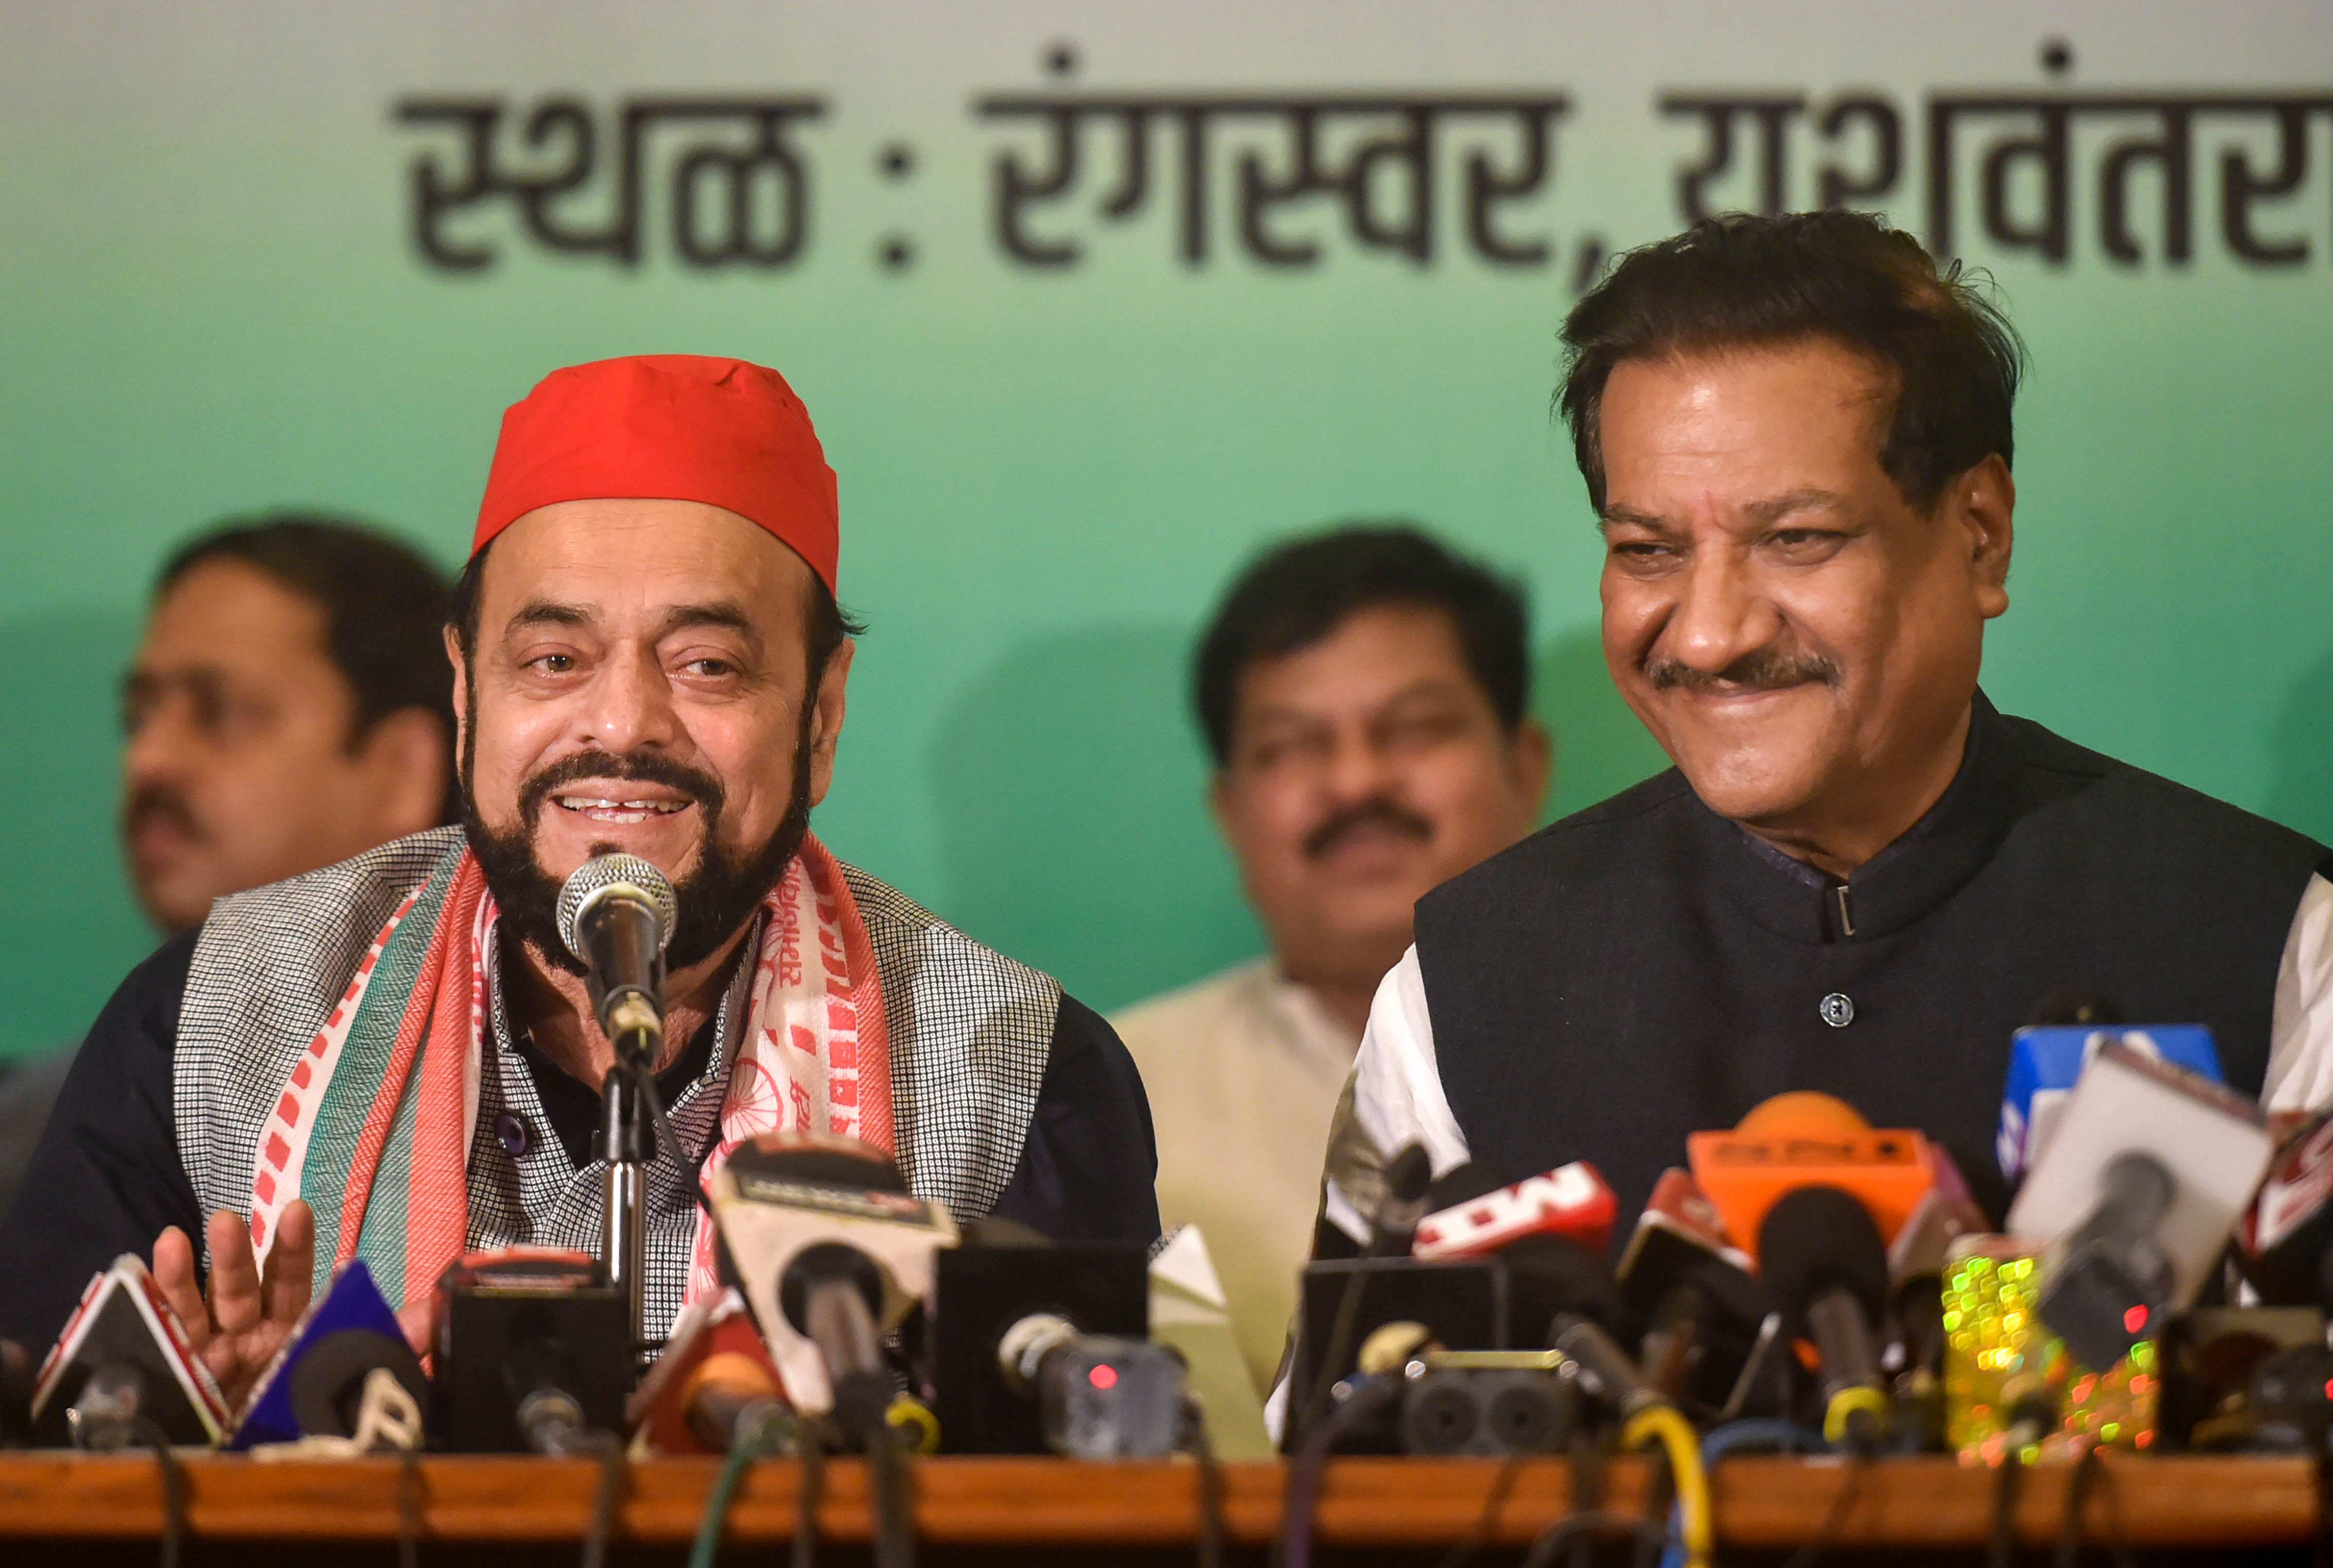 Samajwadi Party MLA Abu Azmi (L) and Congress leader Prithviraj Chavan at a press conference to announce their alliance for the upcoming Assembly elections. (PTI Photo)